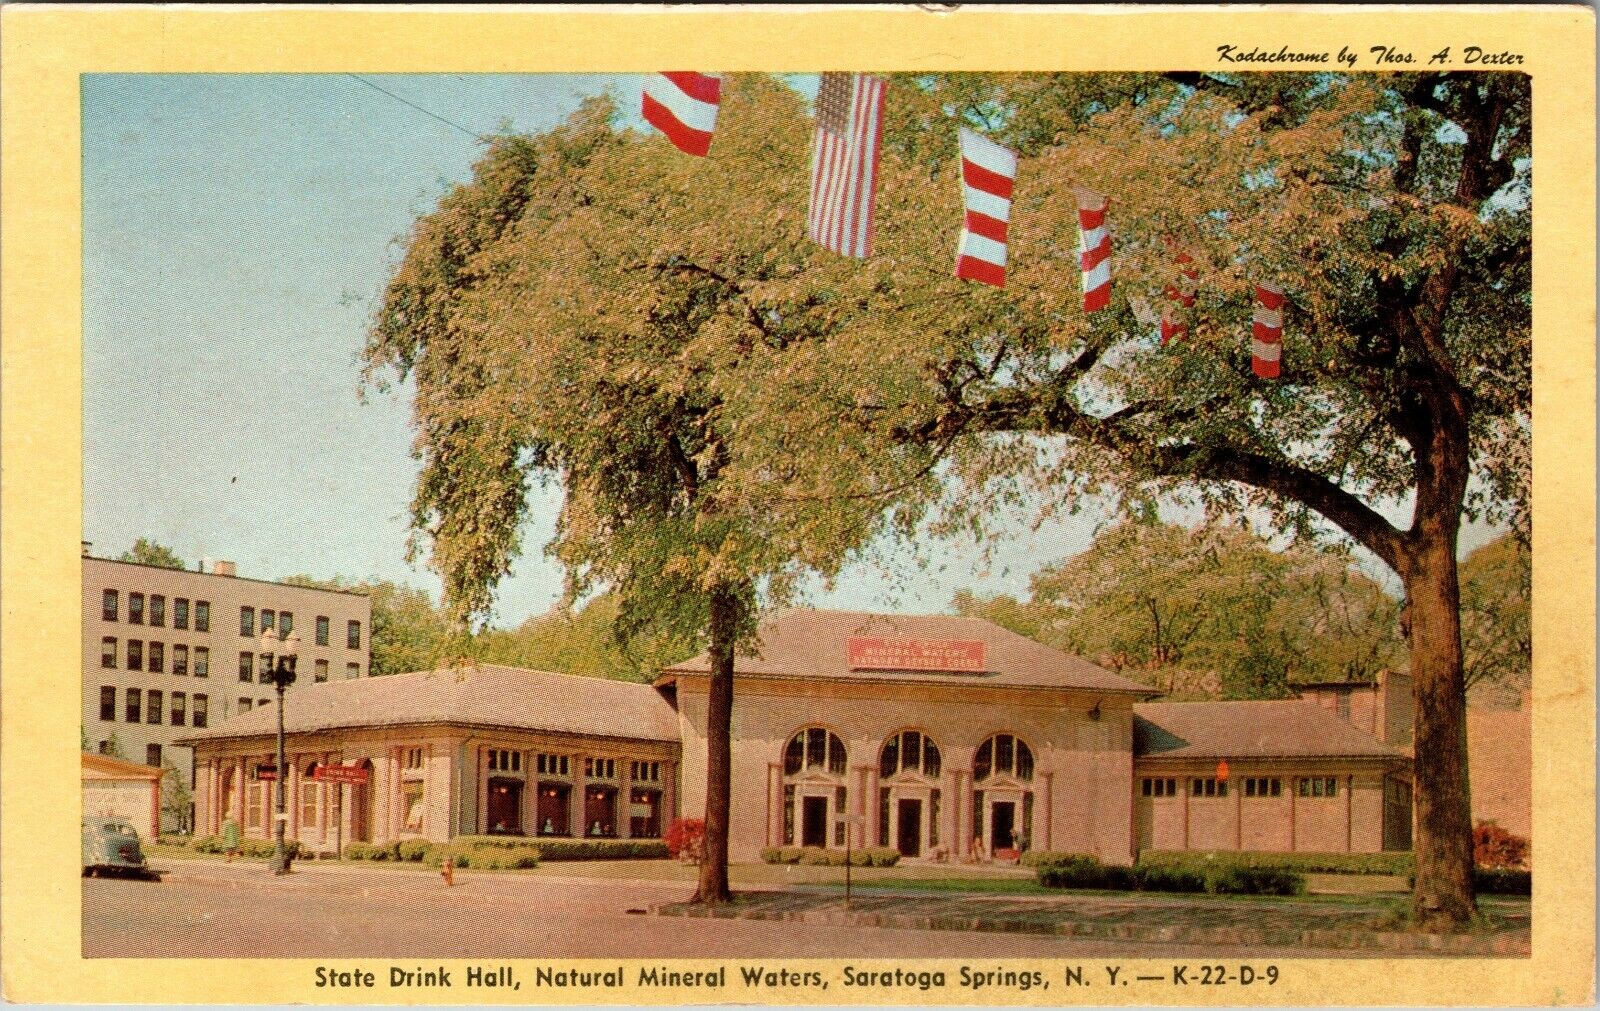 Saratoga Springs New York State Drink Hall Natural Mineral Water Postcard